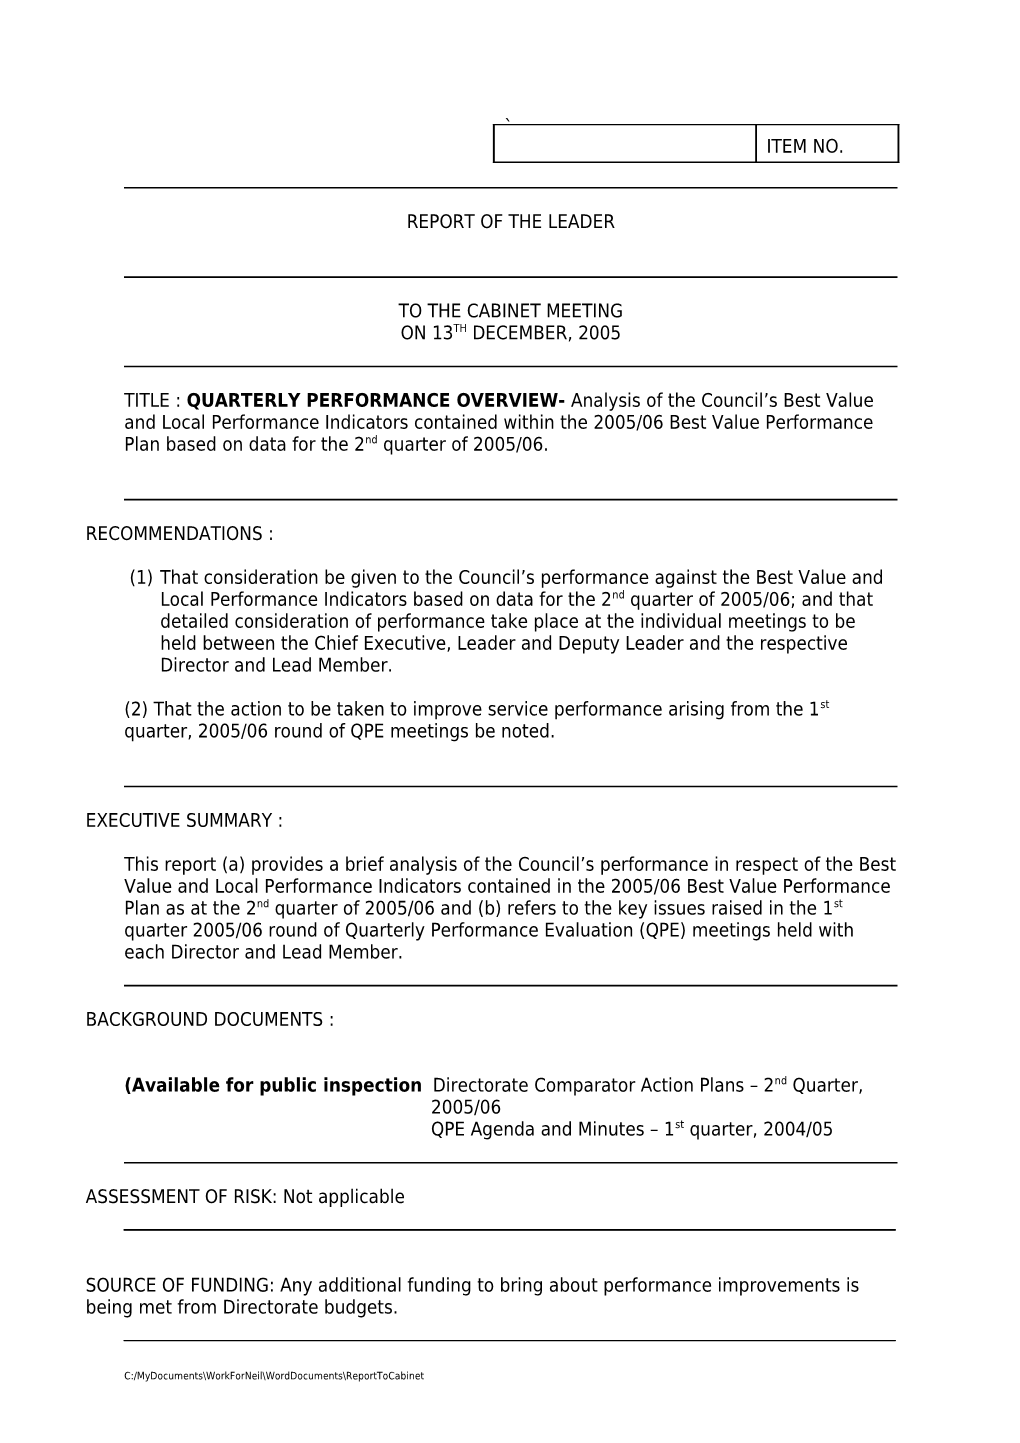 Report of the Director of Personnel and Performance